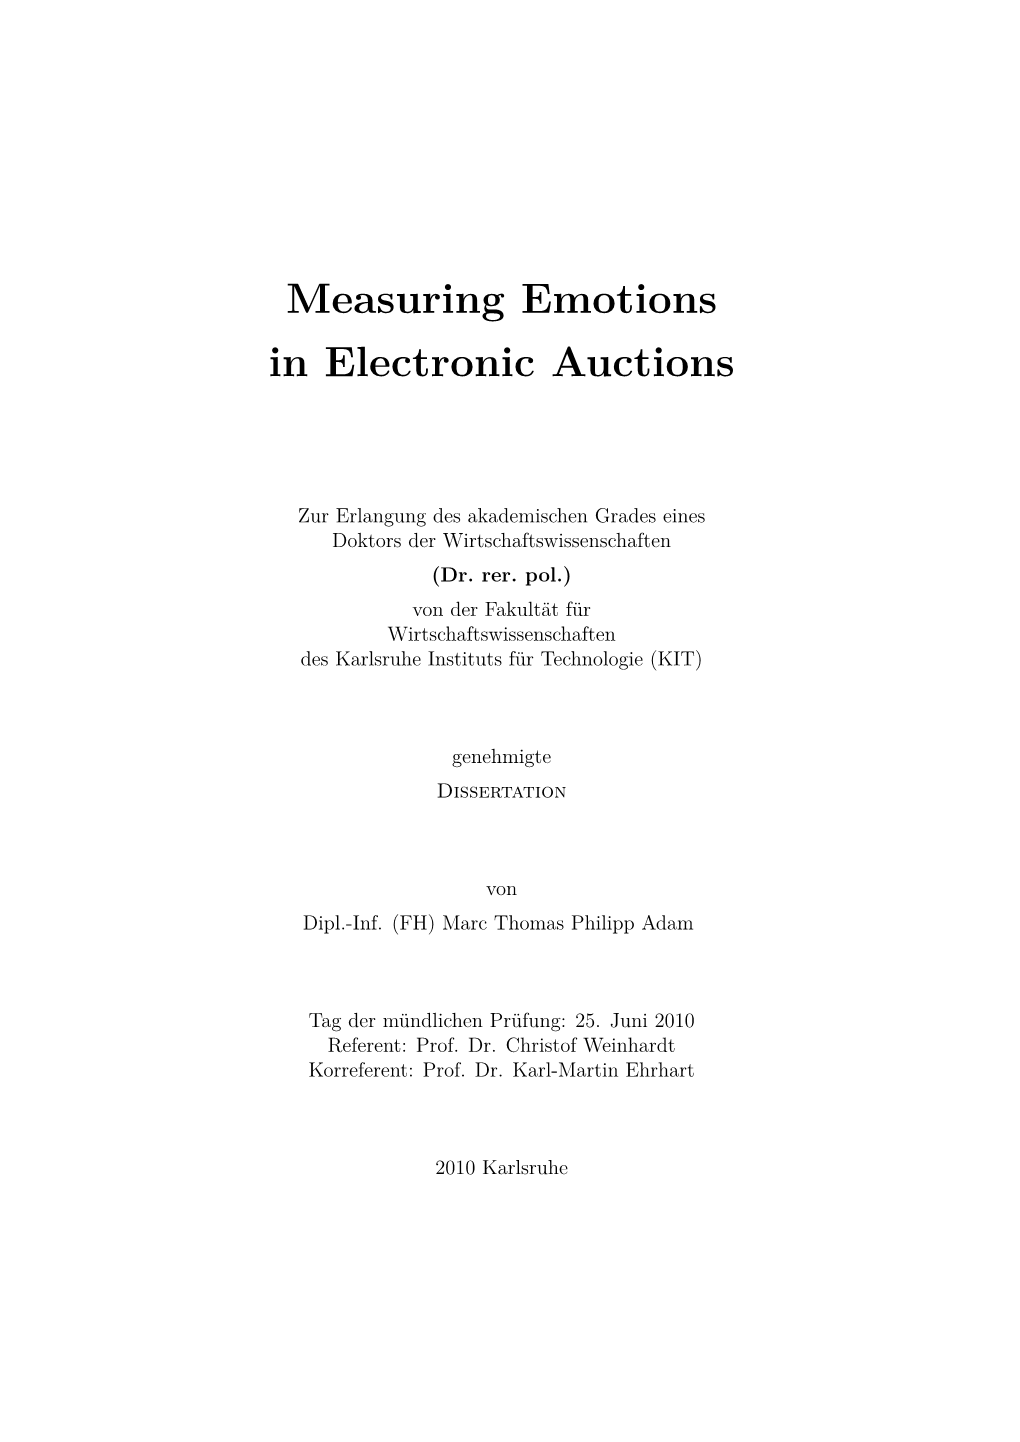 Measuring Emotions in Electronic Auctions